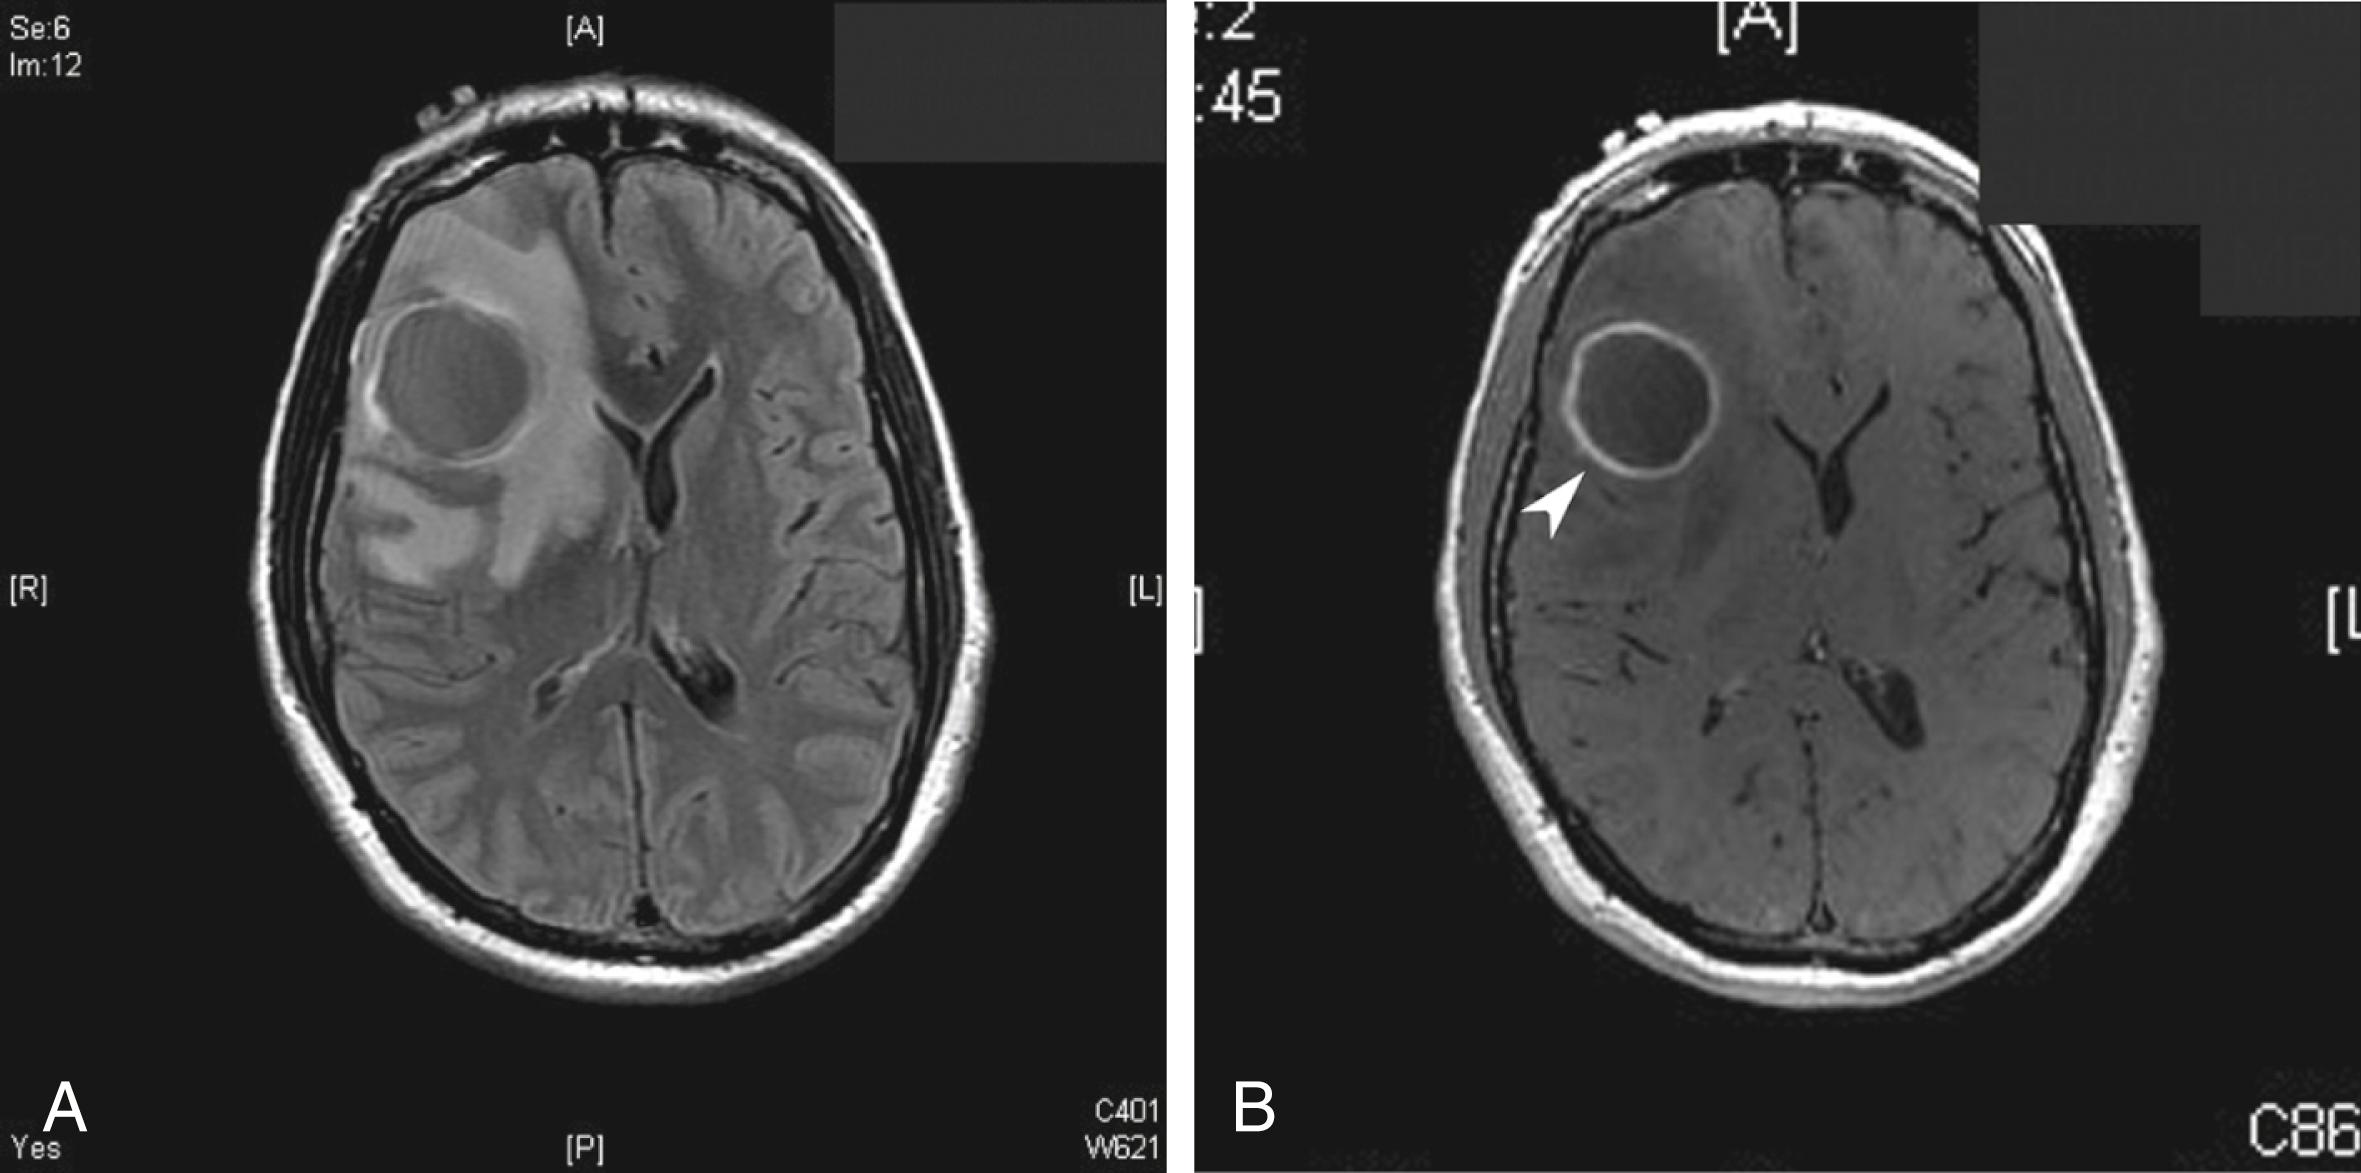 Fig. 79.1, Magnetic resonance imaging of a 47-year-old man with a new, progressive headache starting 1 week after infected tooth extraction. A, Fluid-attenuated inversion recovery (FLAIR) image showing the central hypodense lesion with surrounding edema. B, T1 image after gadolinium administration, which shows a thick rim of contrast enhancement around the lesion (white arrowhead) .